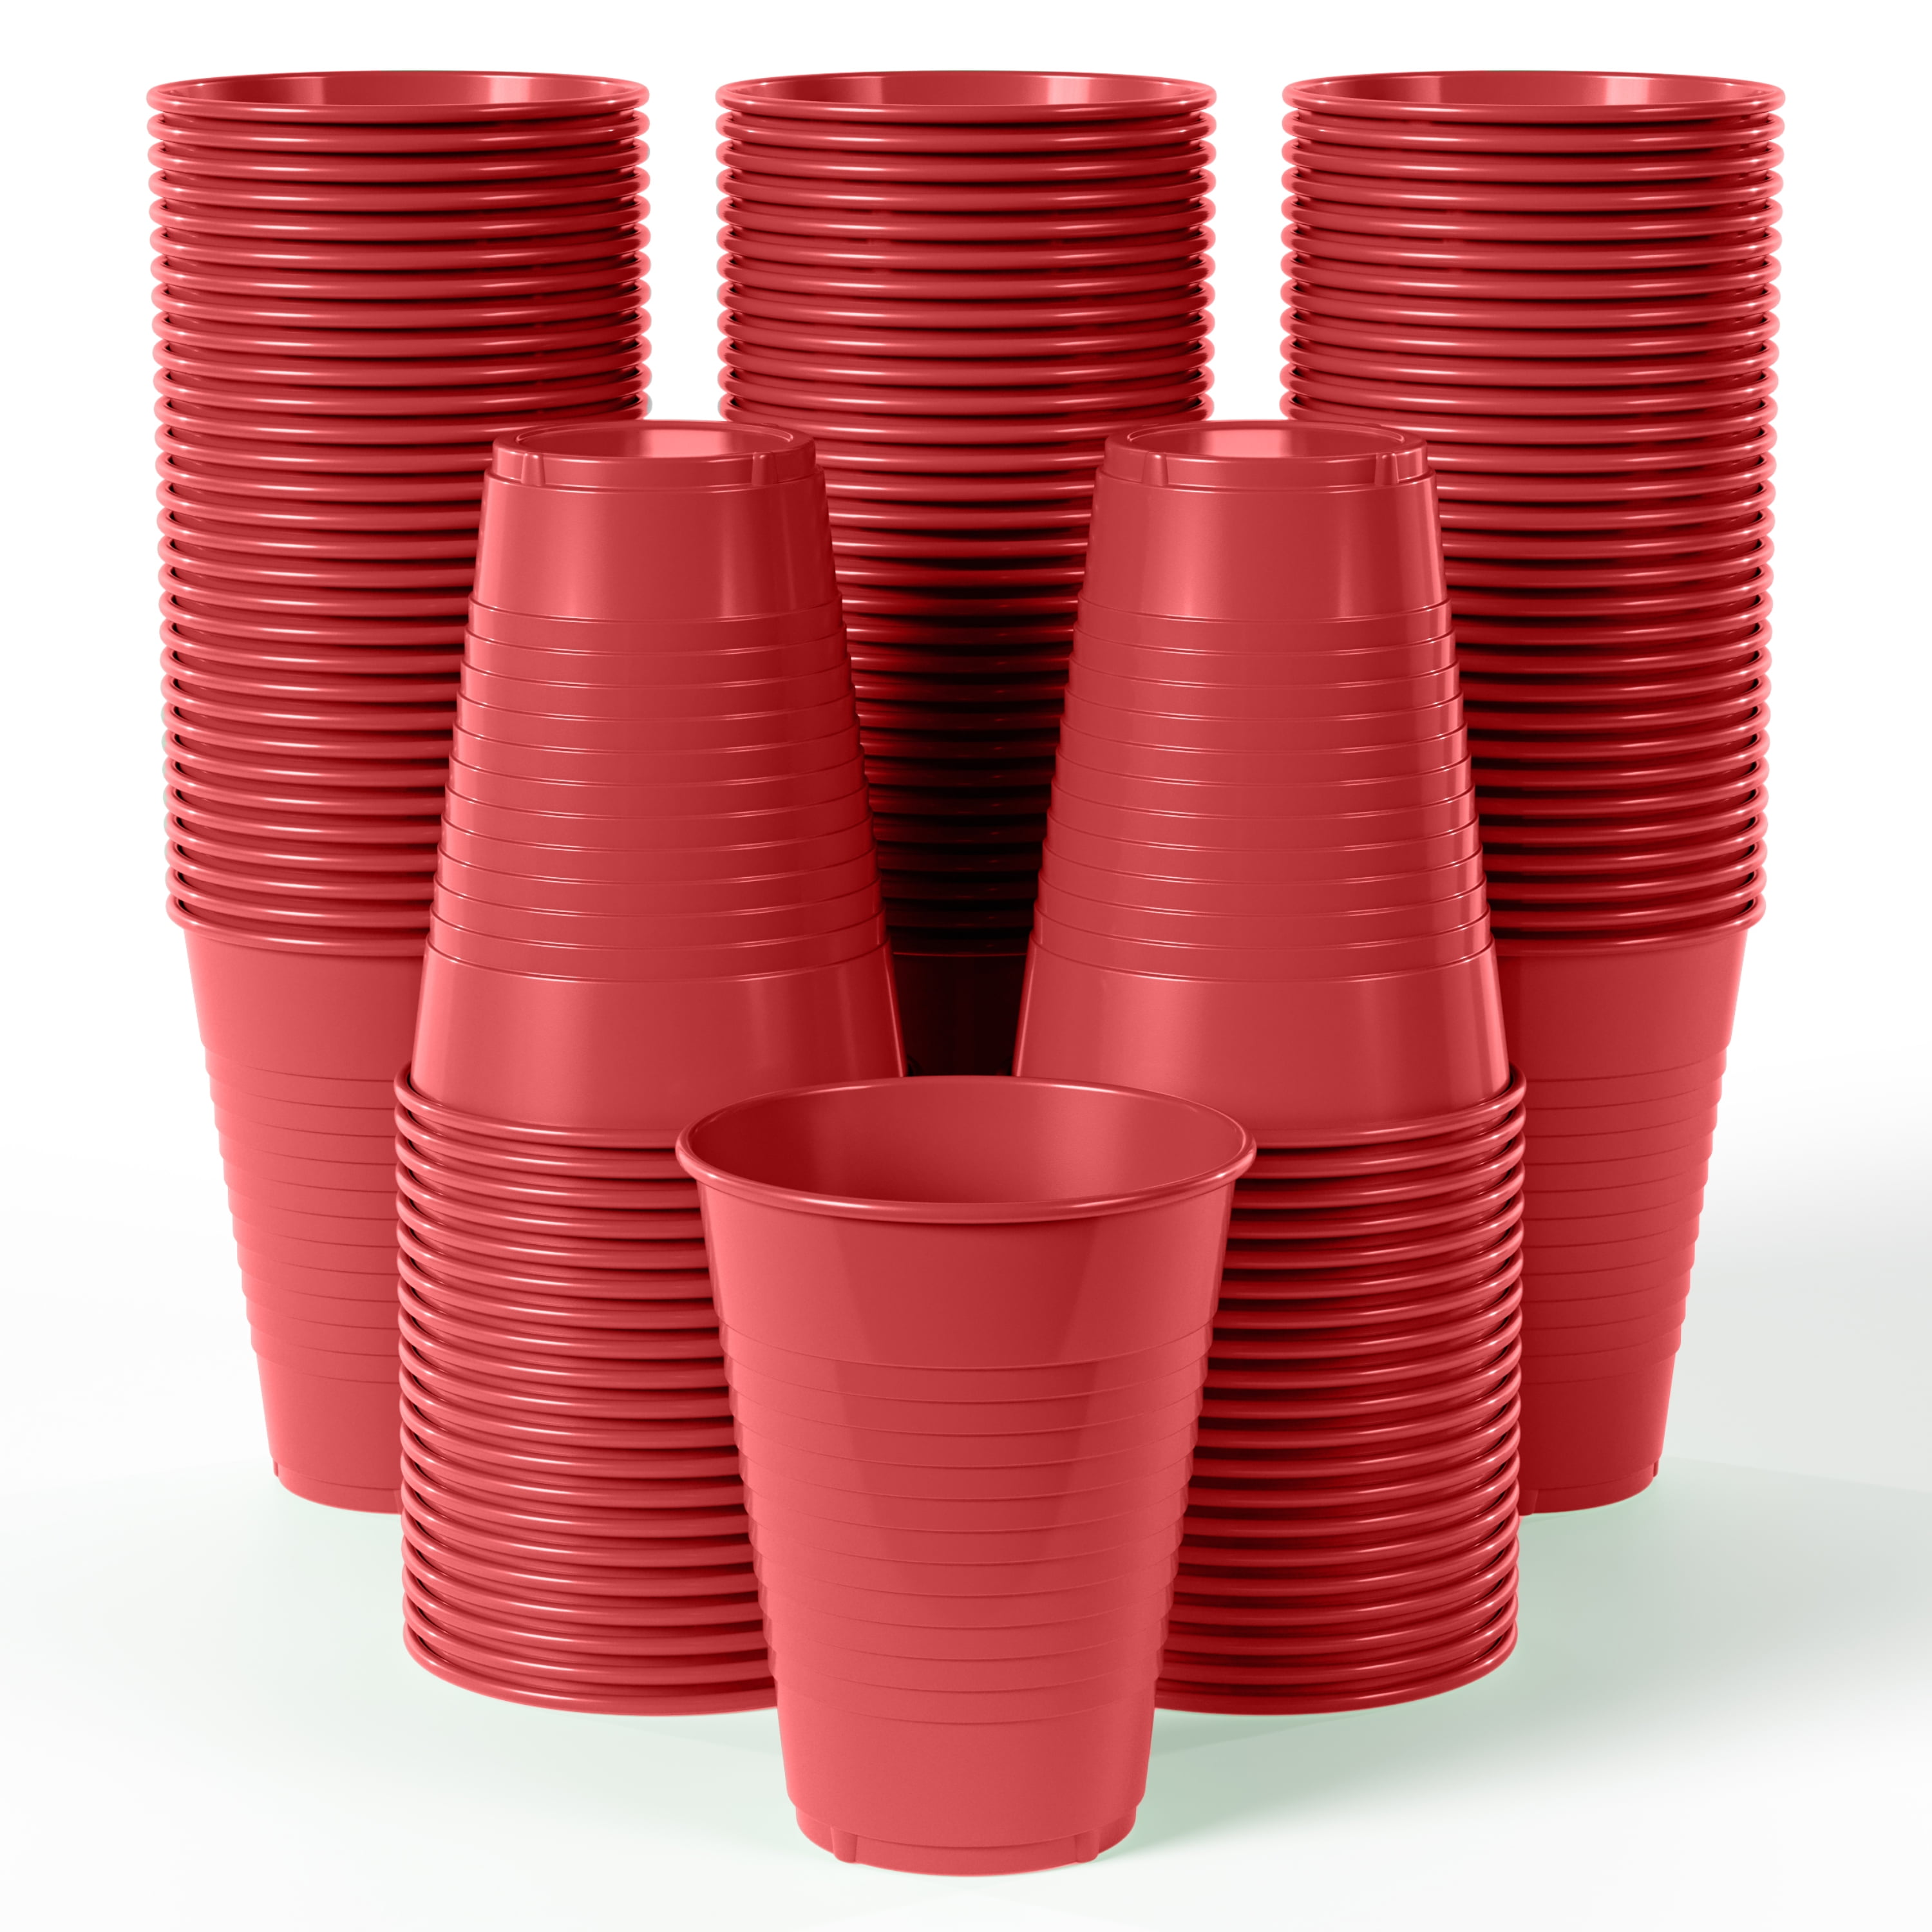  bUCLA 100pcs 12OZ Pink Plastic Cups-Disposable Solo Cups-Premium  Unbreakable Wedding Cups-Party Cups,Great For Mother's Day and Bridal  Shower : Health & Household